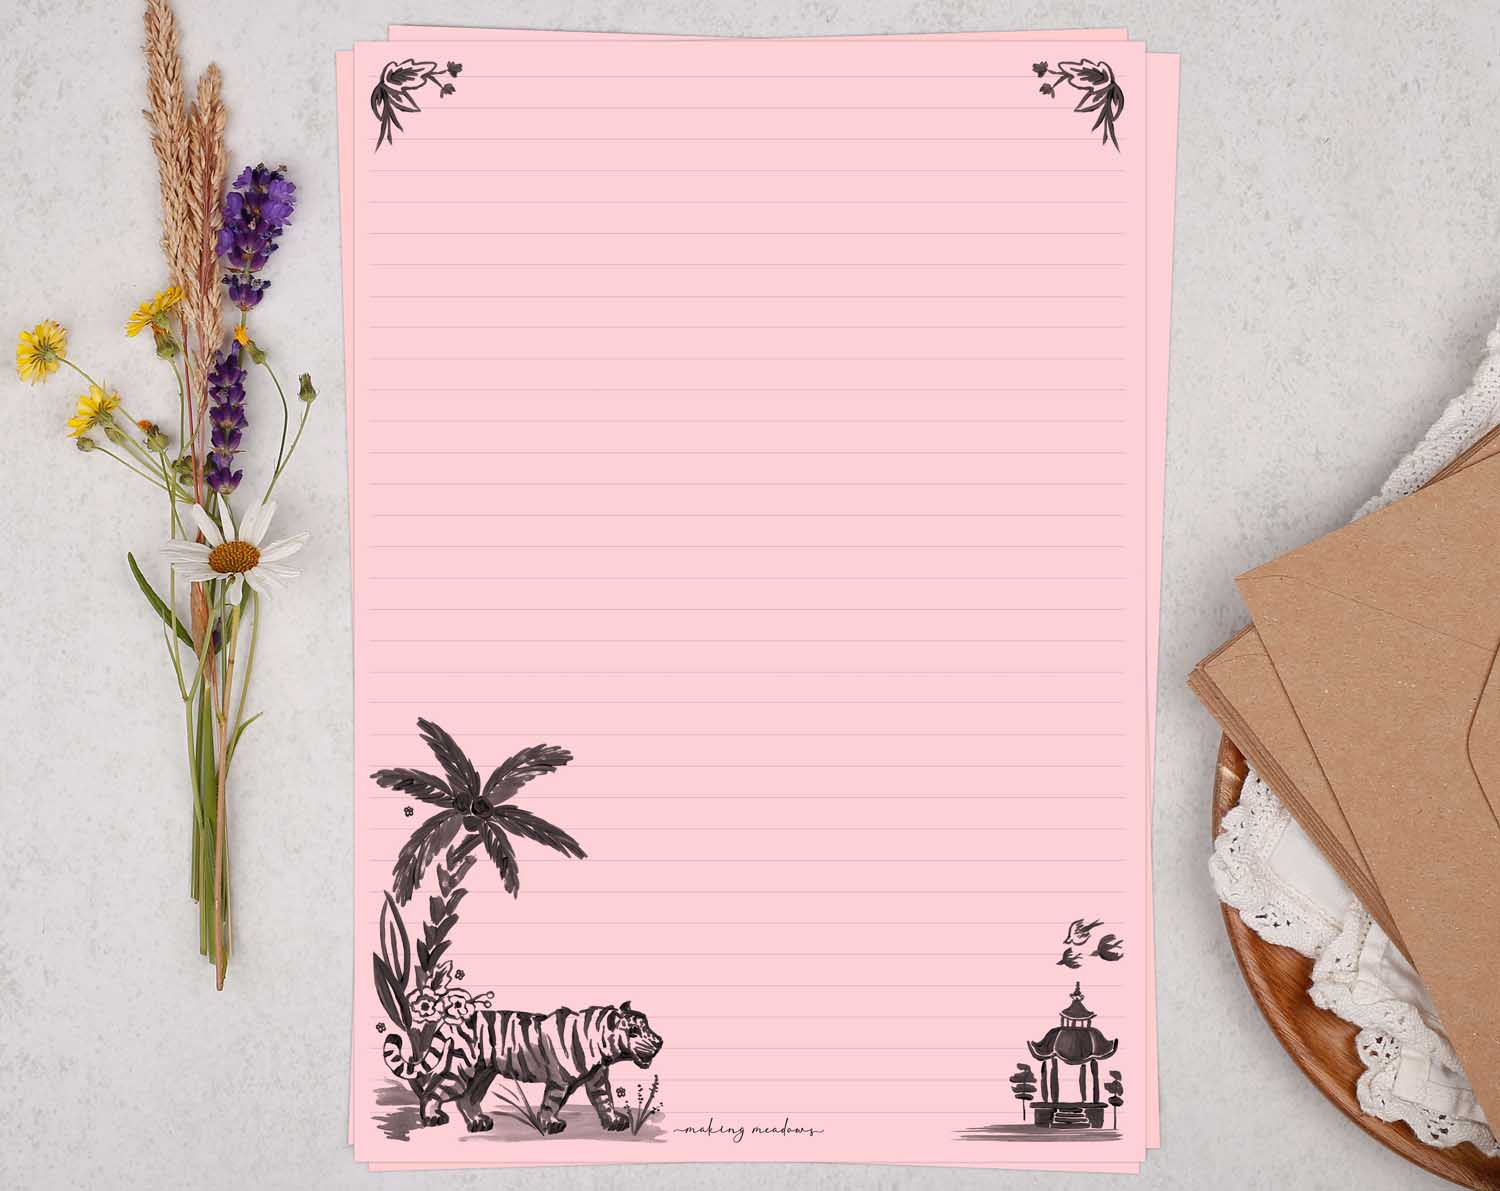 Pink A4 letter writing paper sheets with a watercolour tiger and floral border in a tropical design.